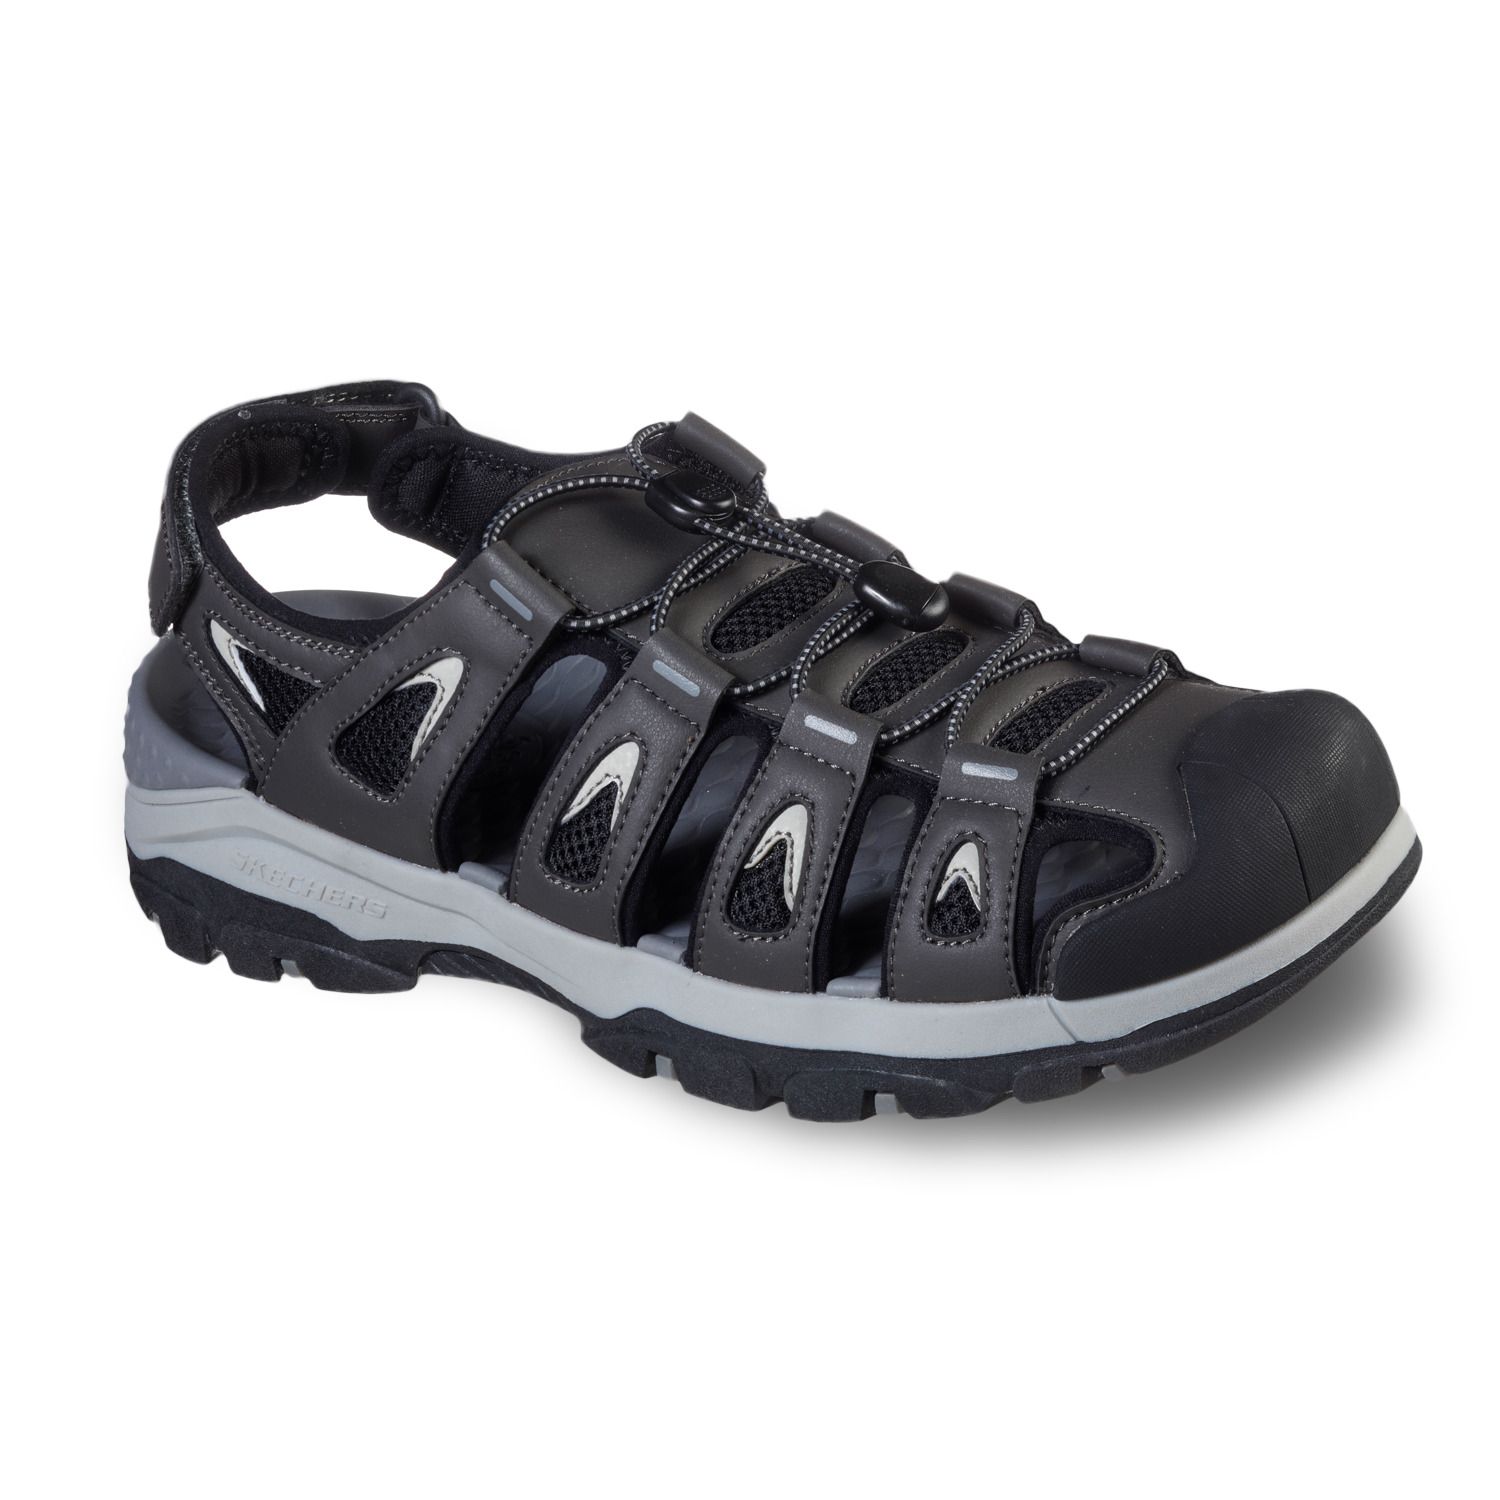 skechers sandals relaxed fit